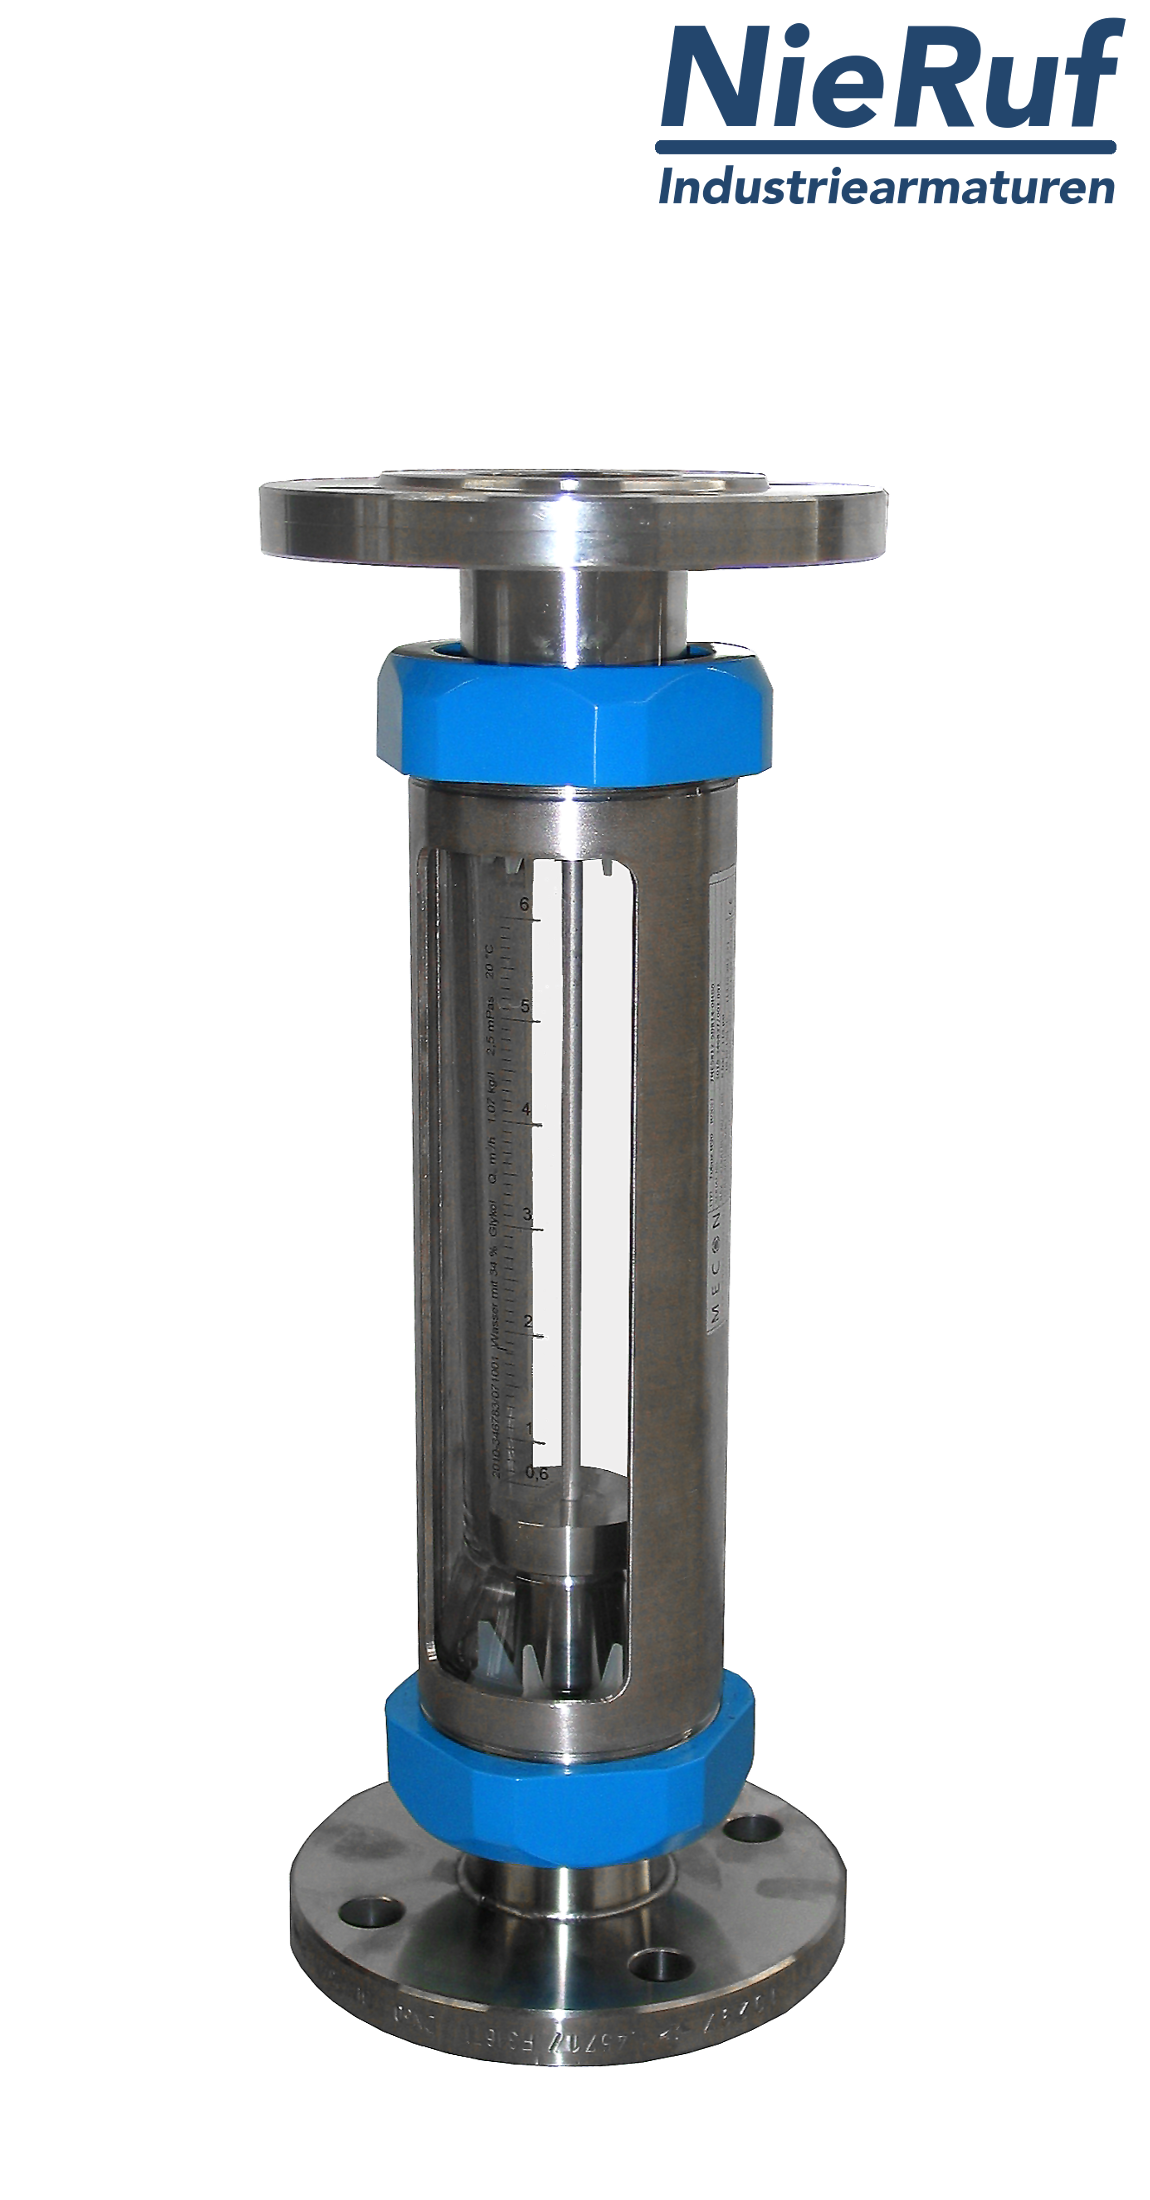 Variable area flowmeter stainless steel + borosilicate flange DN10 10.0 - 100.0 l/h water FKM